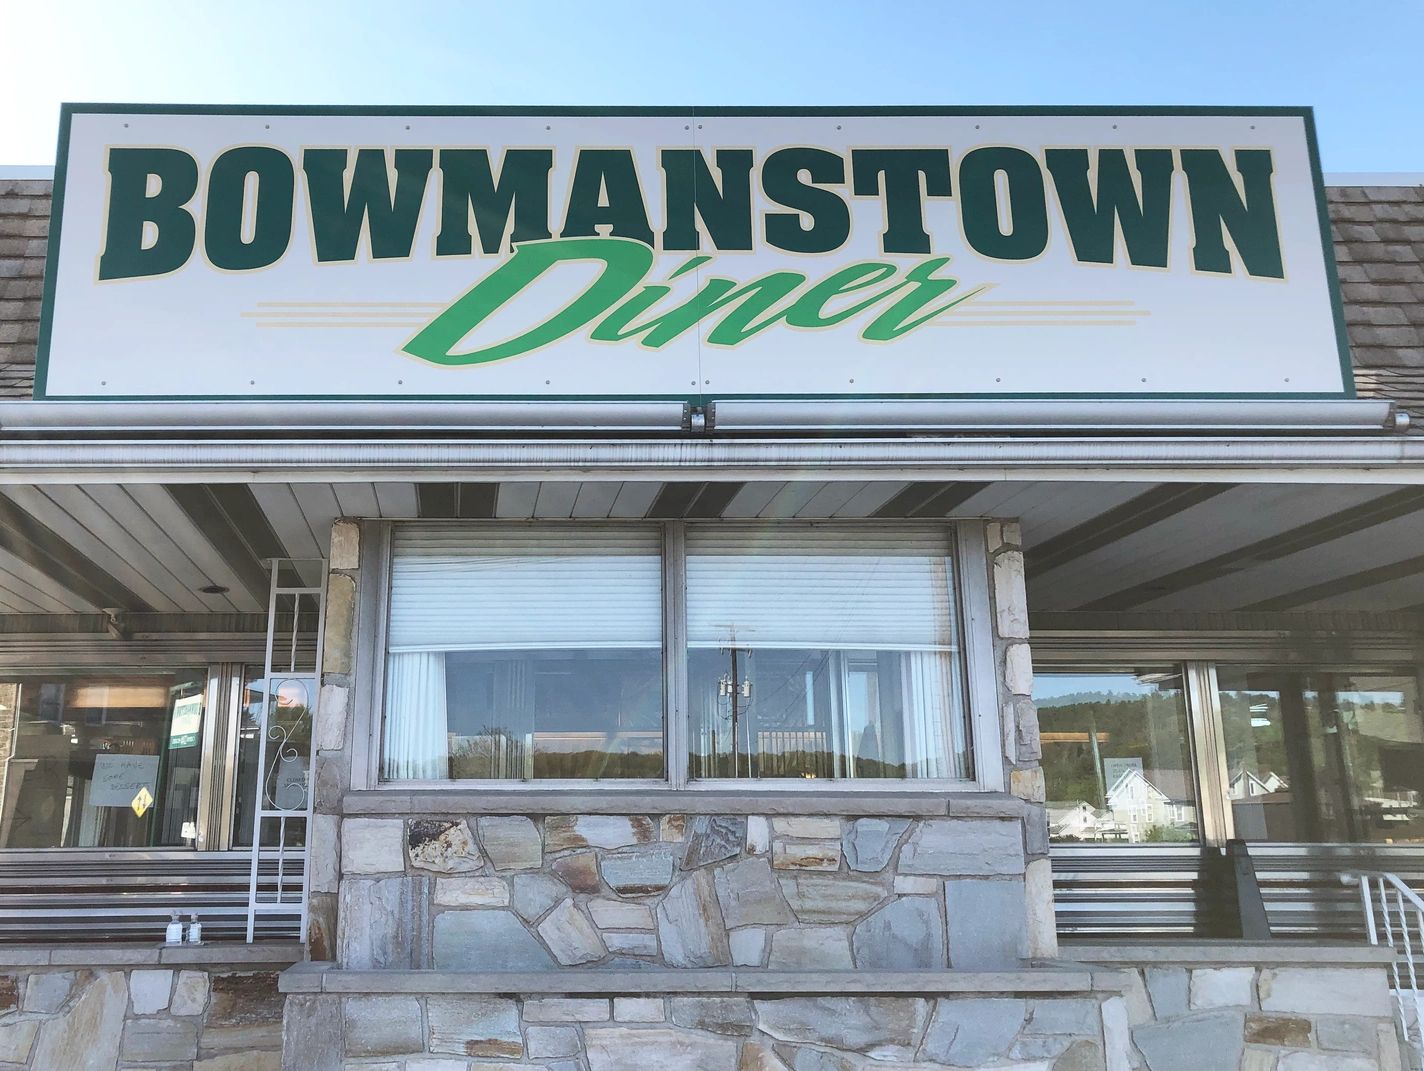 The Bowmanstown Diner